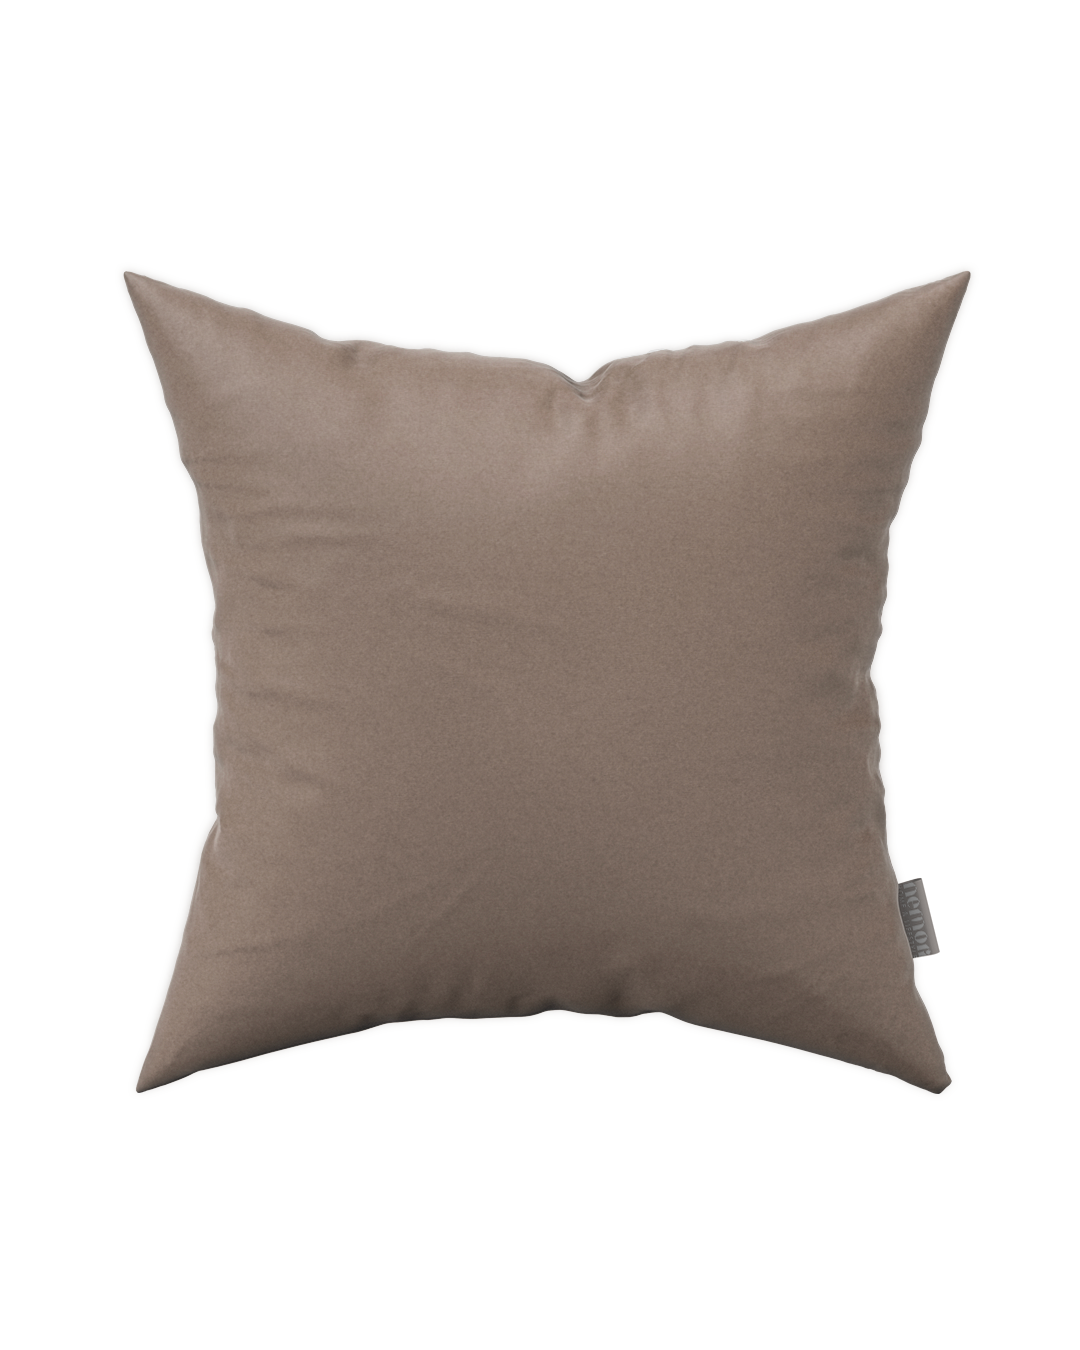 Alpin 02 Beige Pillow Cover